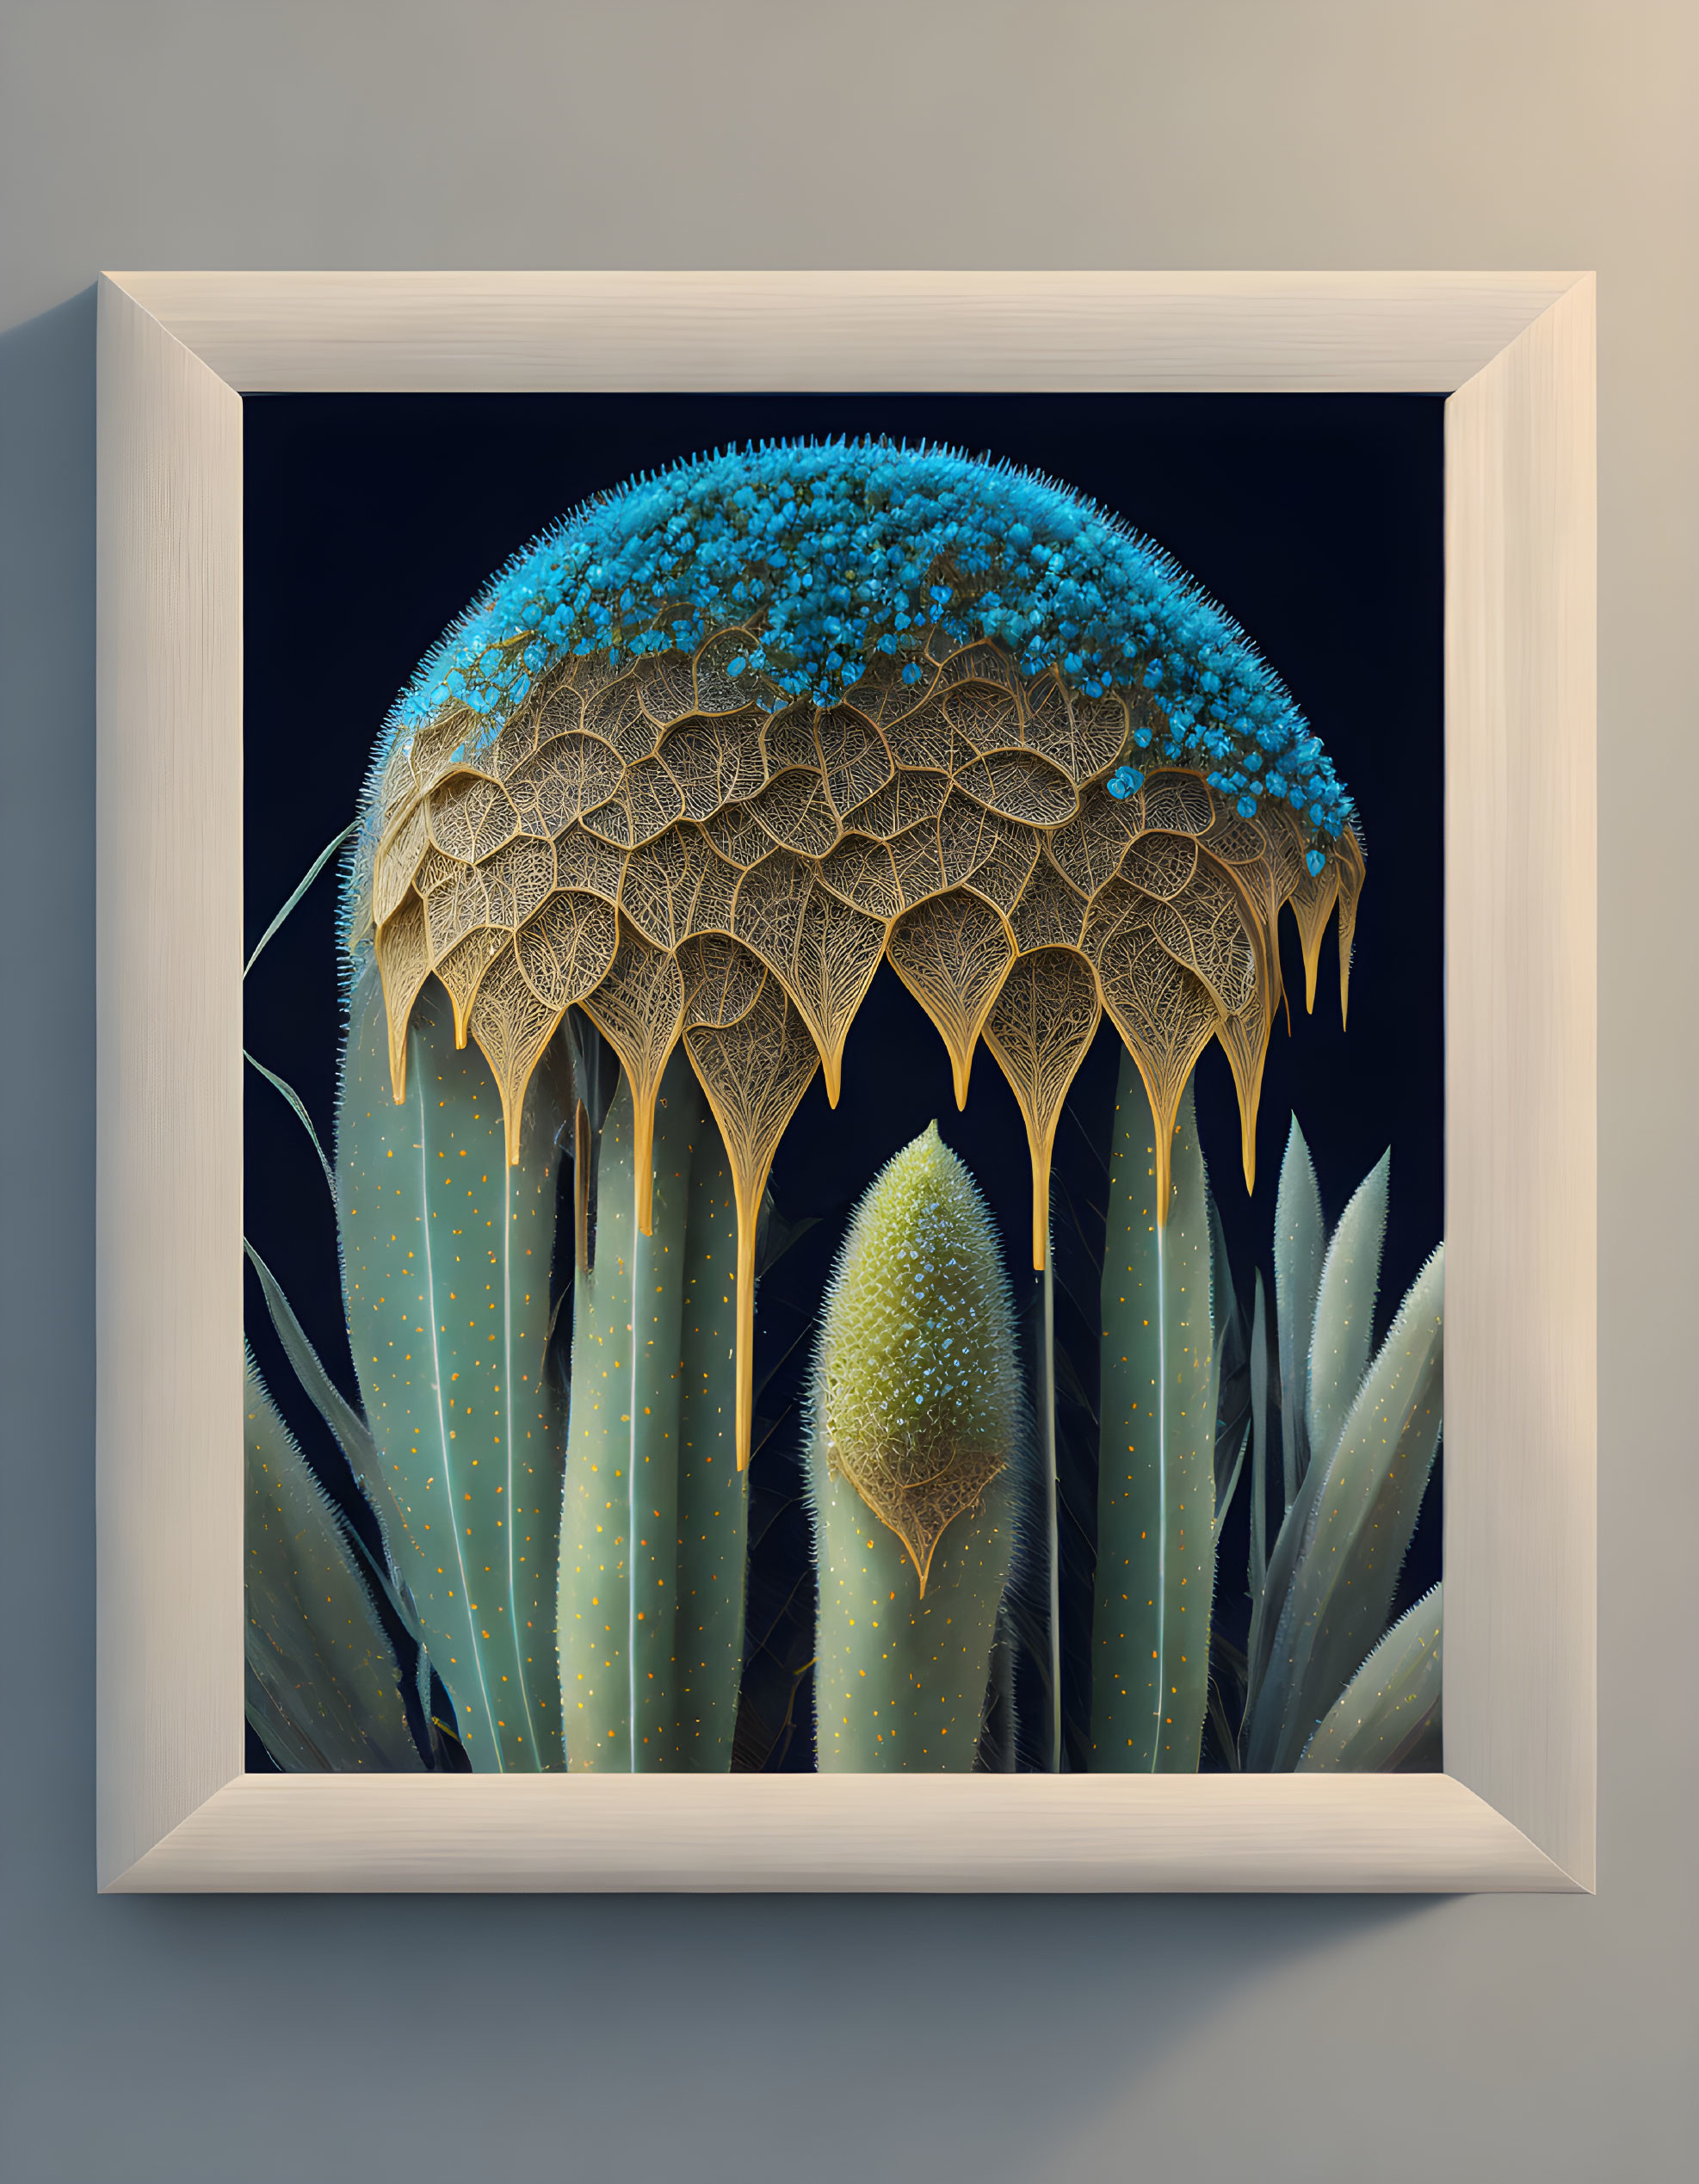 Stylized semi-abstract cactus art with textured dome top and blue dots on plain background